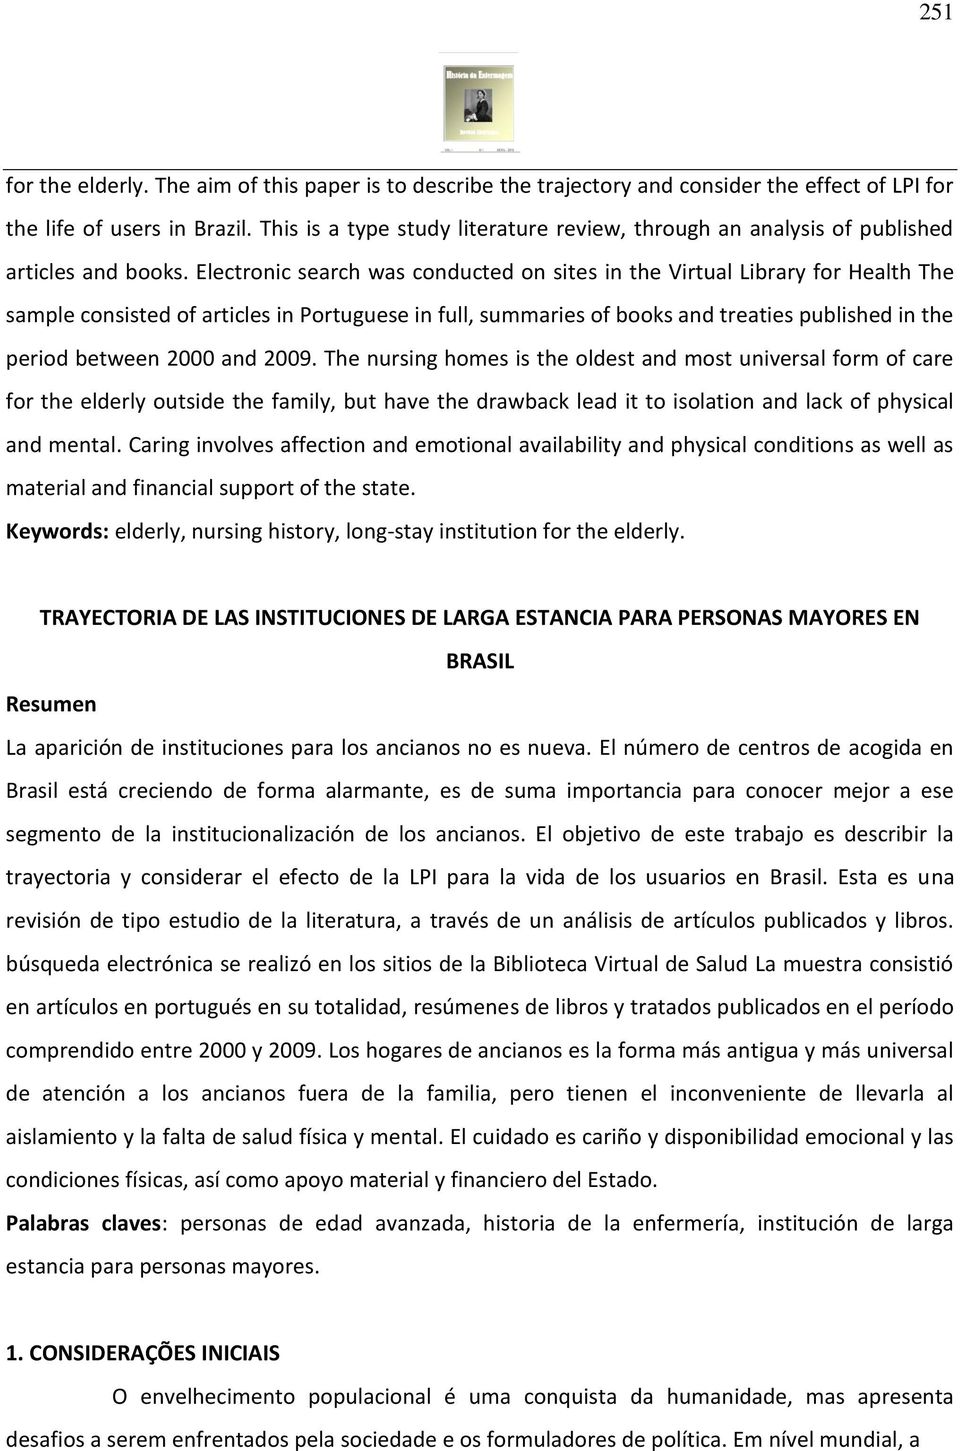 Electronic search was conducted on sites in the Virtual Library for Health The sample consisted of articles in Portuguese in full, summaries of books and treaties published in the period between 2000